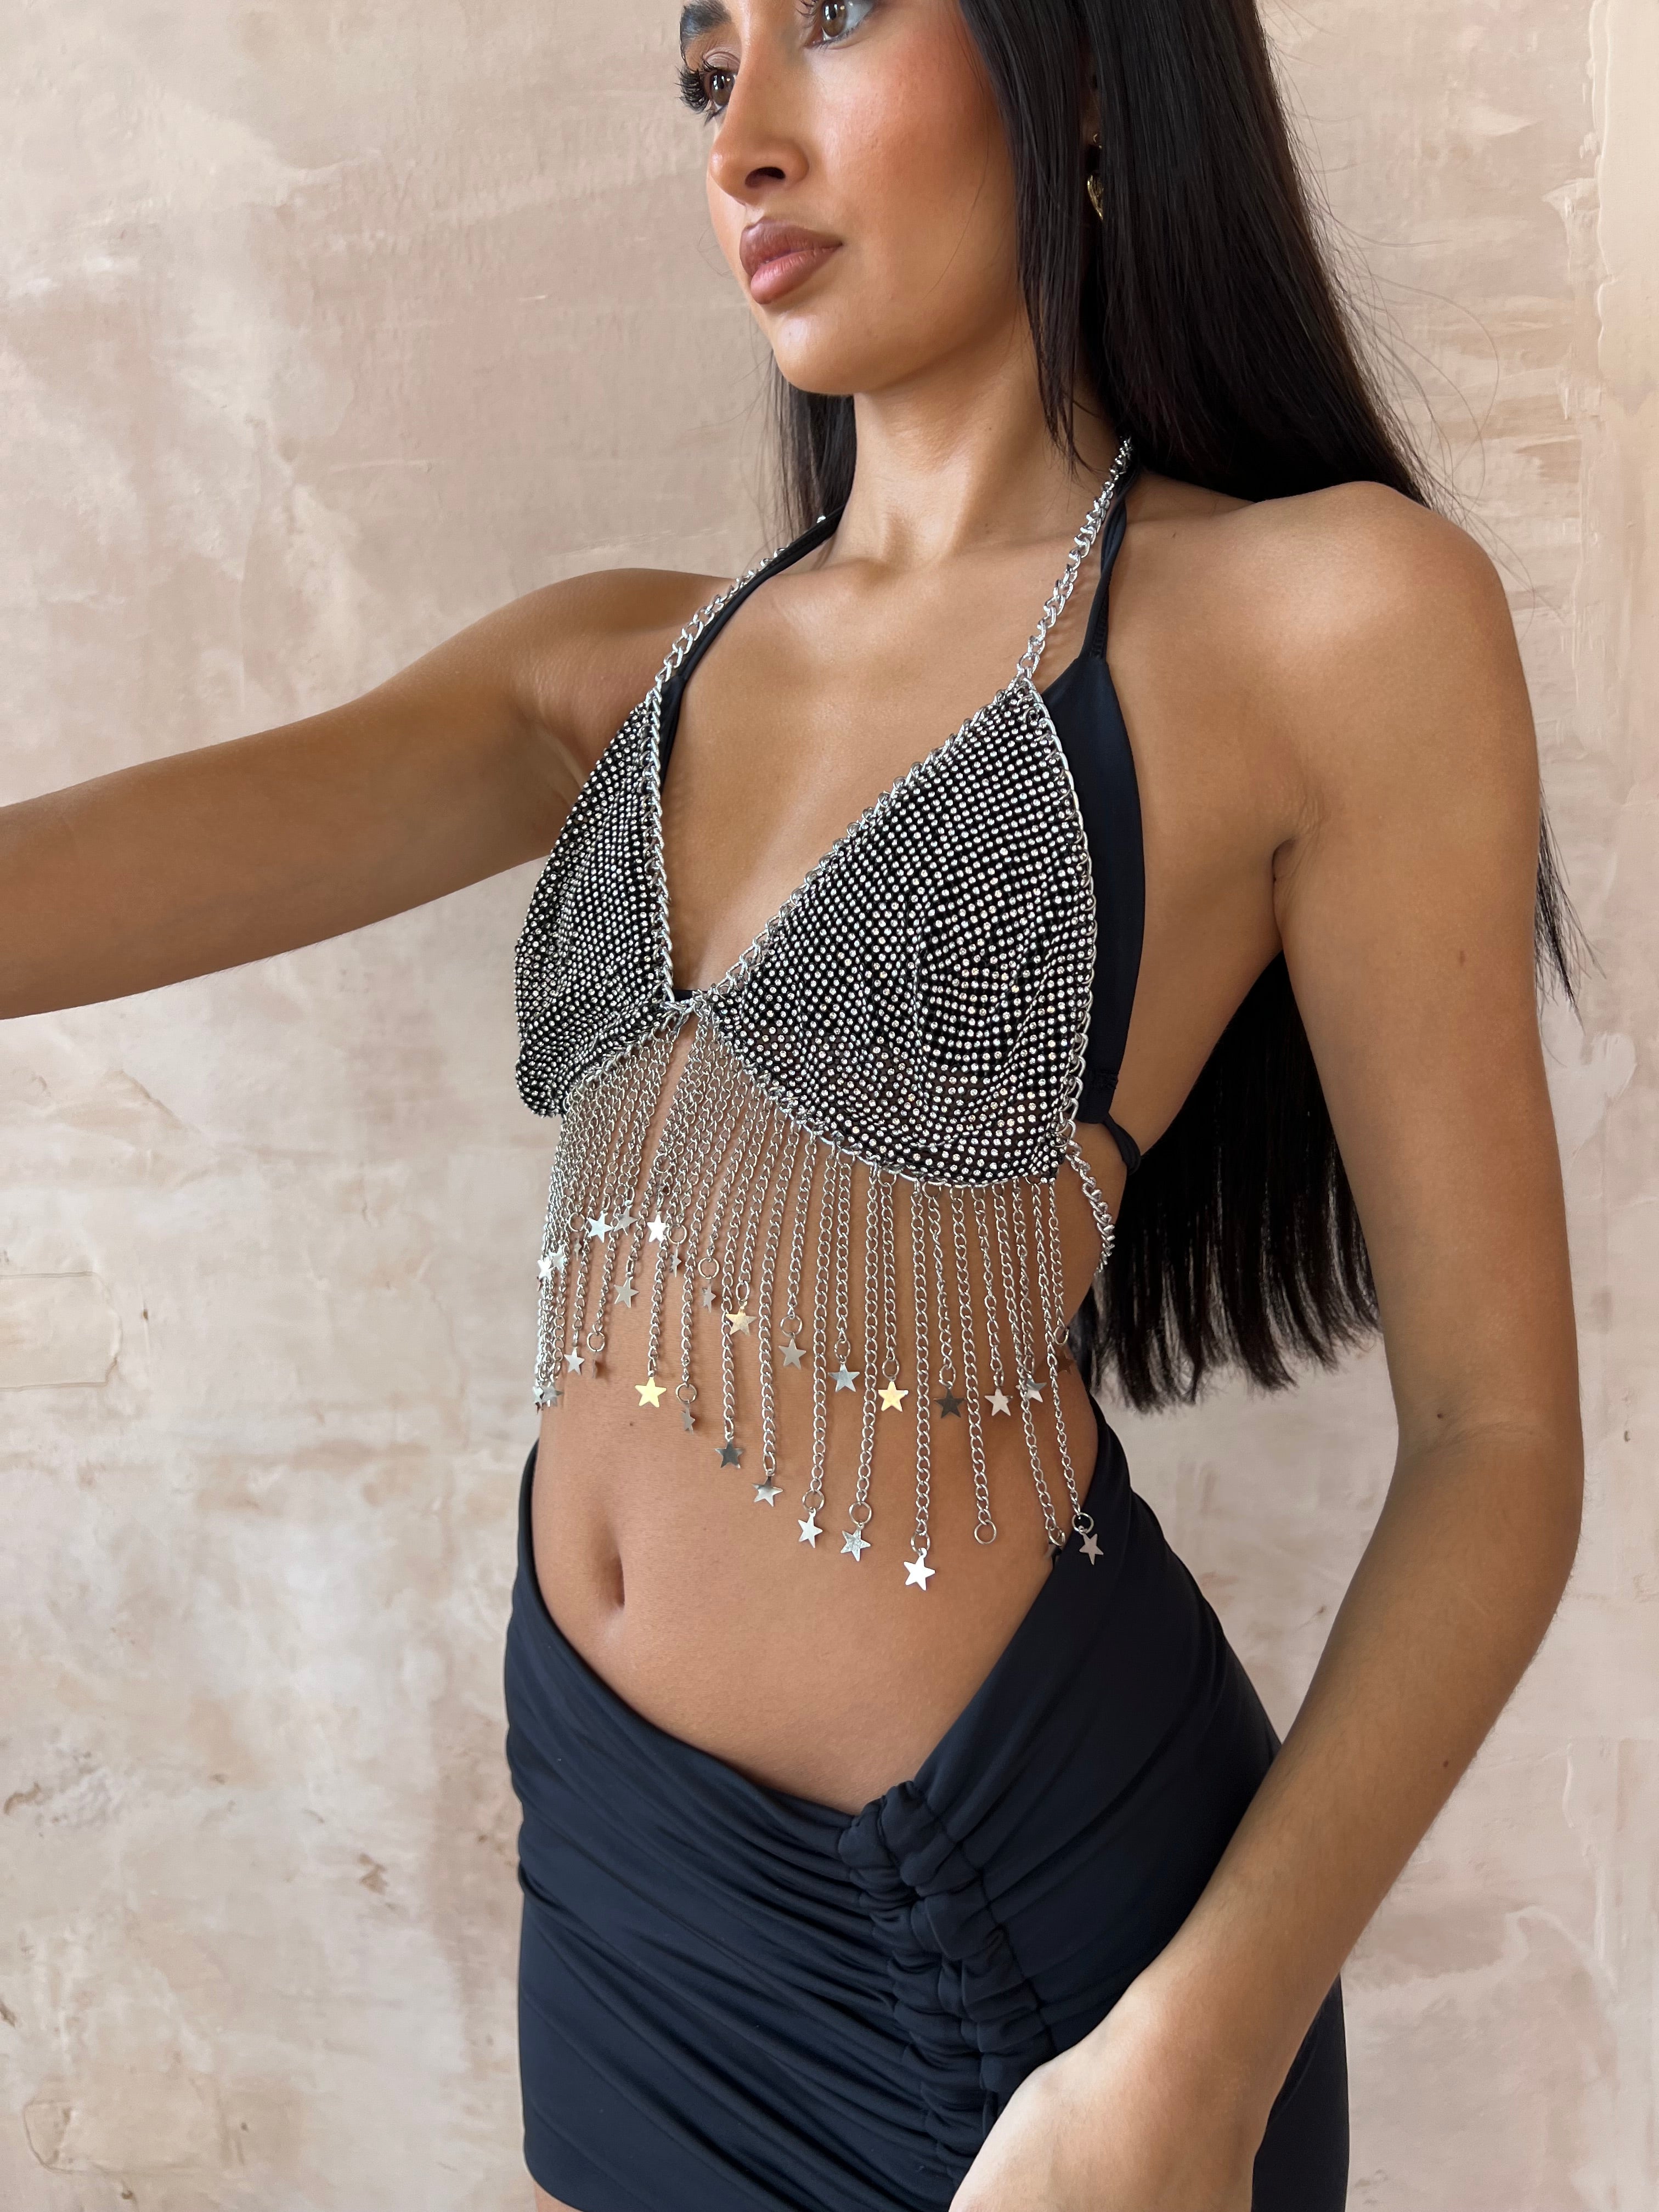 Starry chained bralette- top only